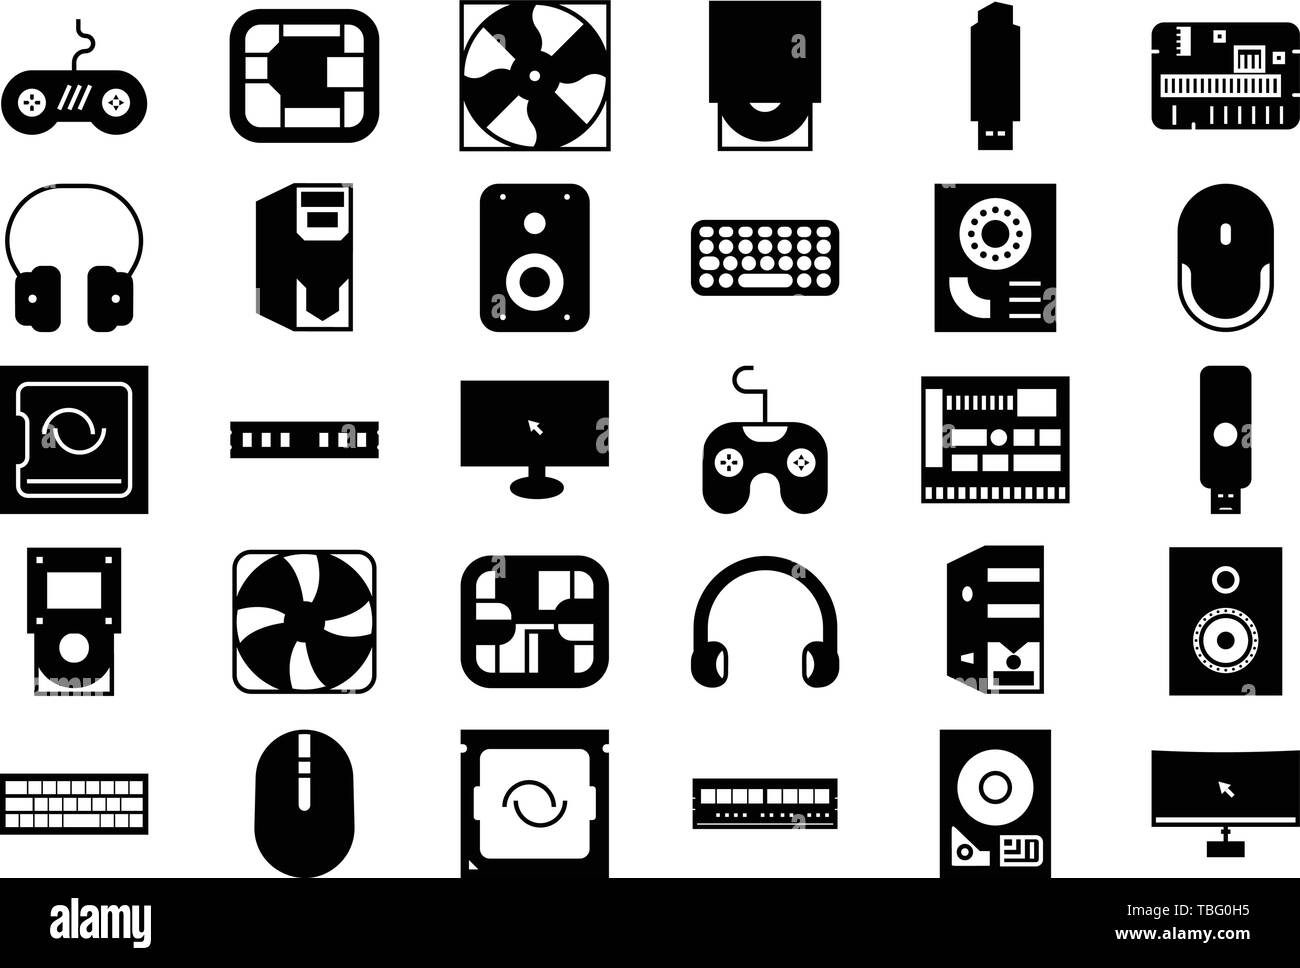 Video Game Hardware Icons Stock Illustration - Download Image Now